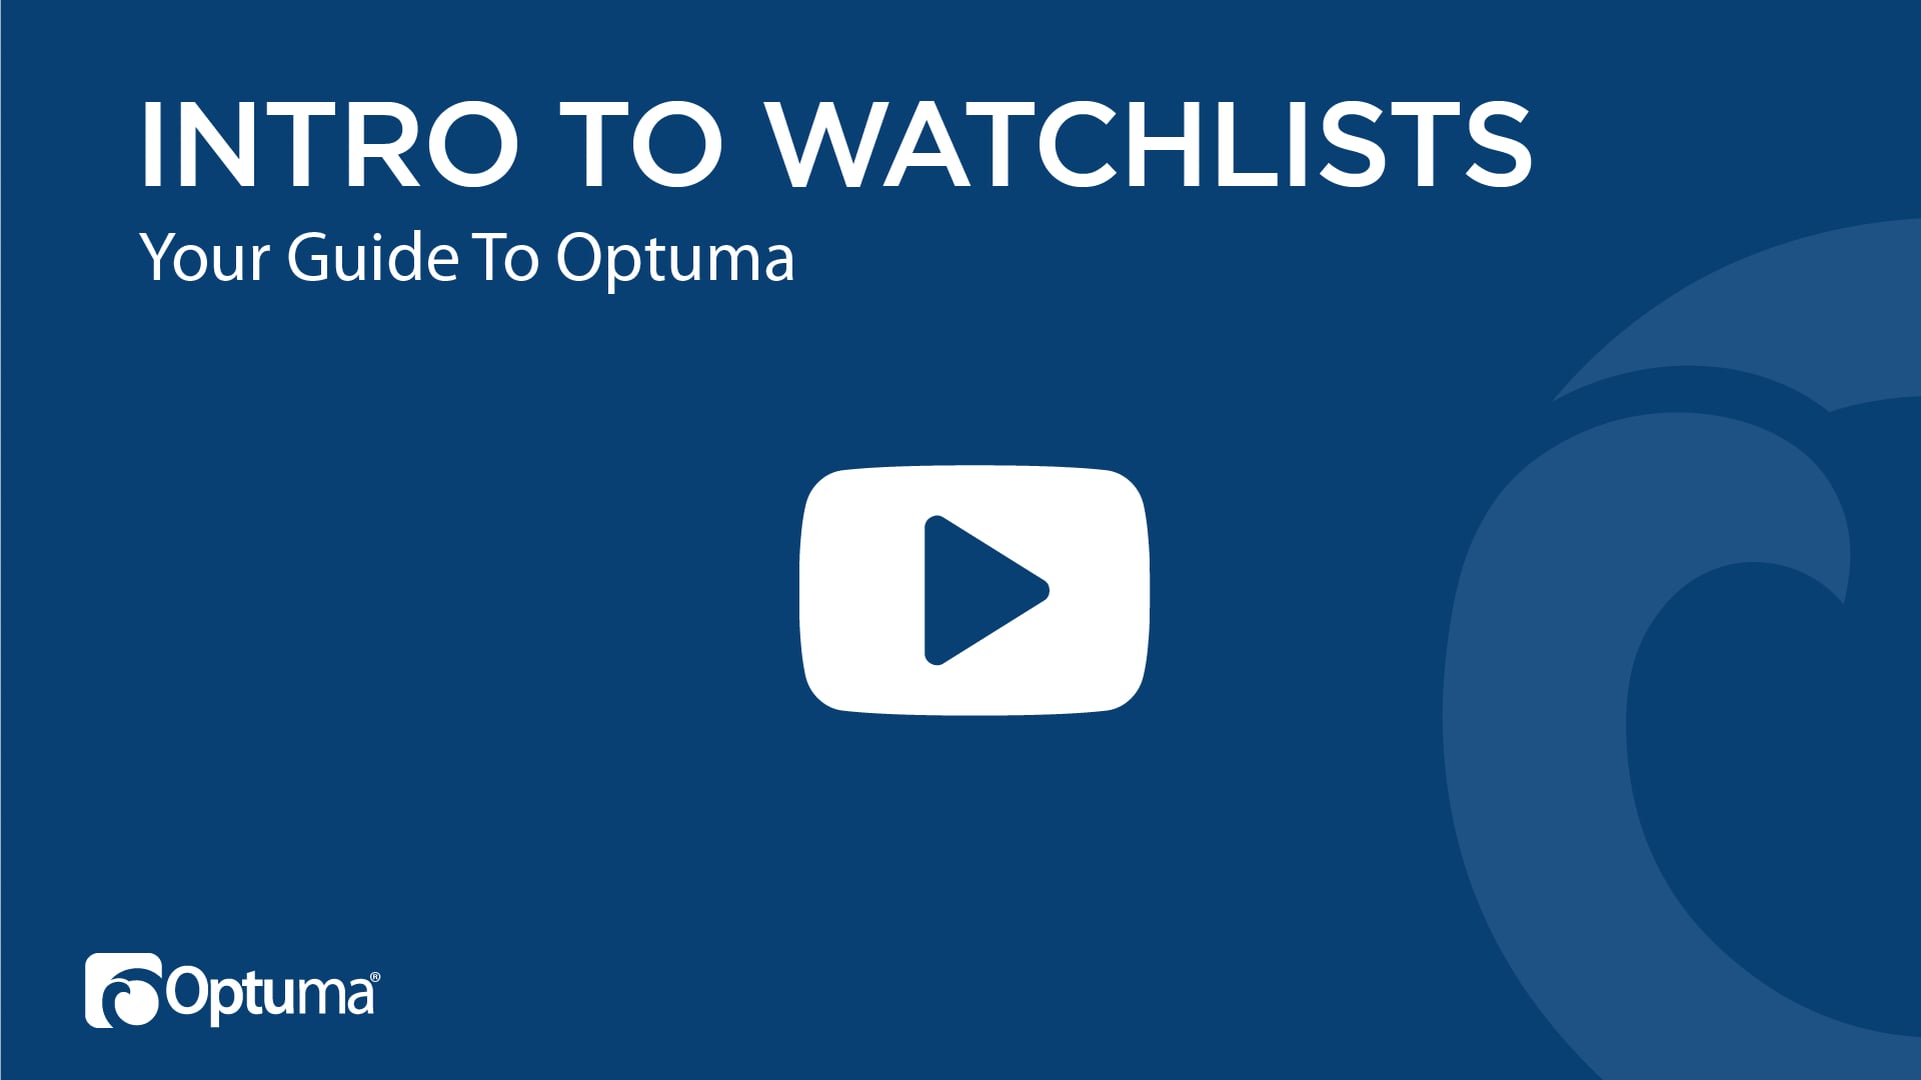 Introduction to Watchlists